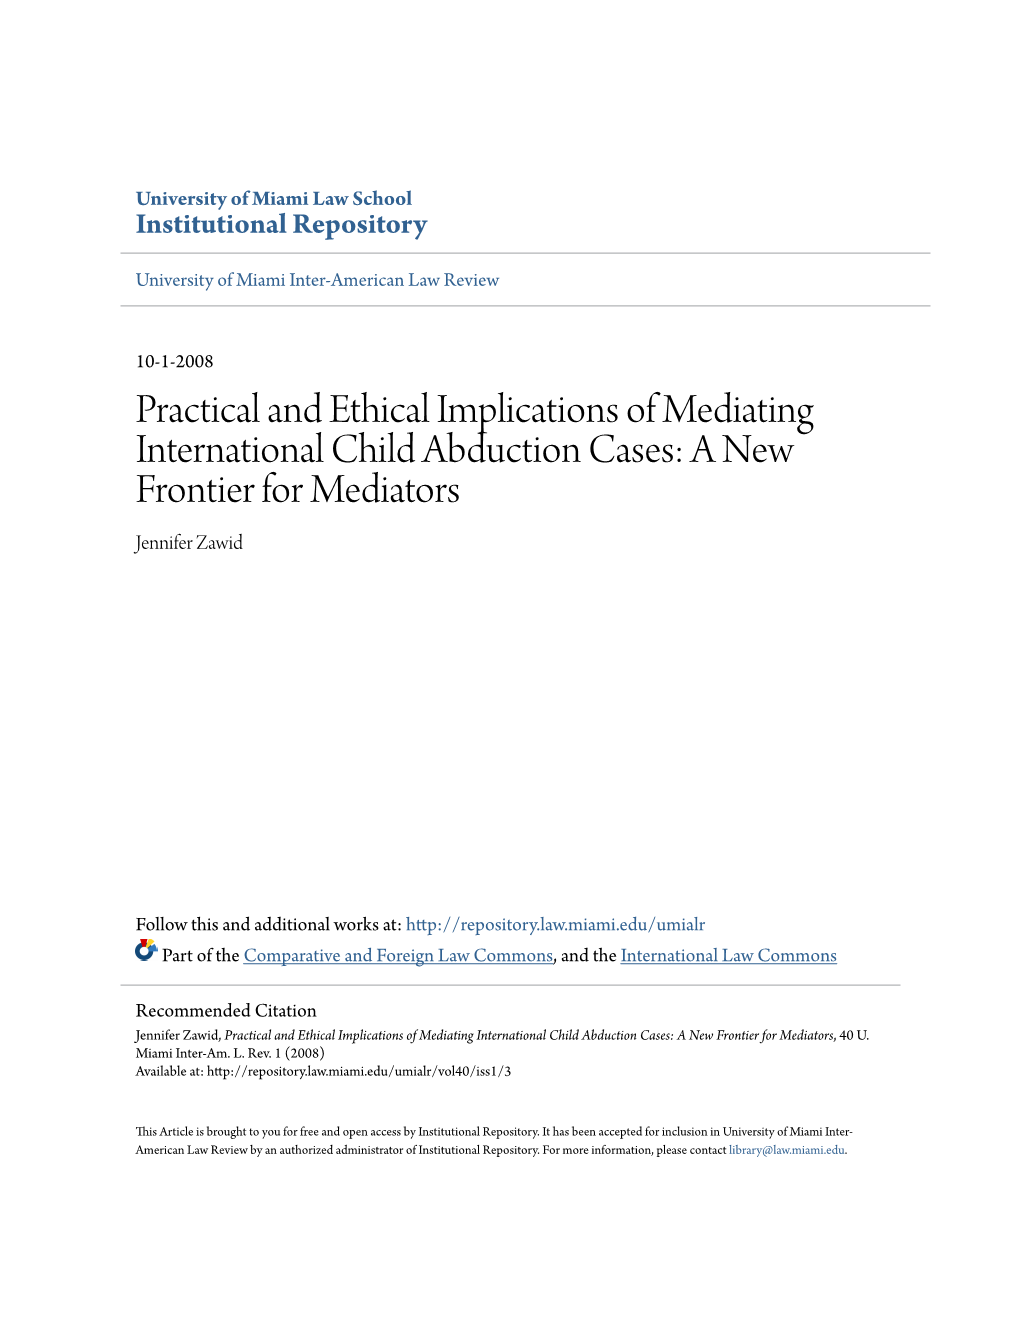 Practical and Ethical Implications of Mediating International Child Abduction Cases: a New Frontier for Mediators Jennifer Zawid